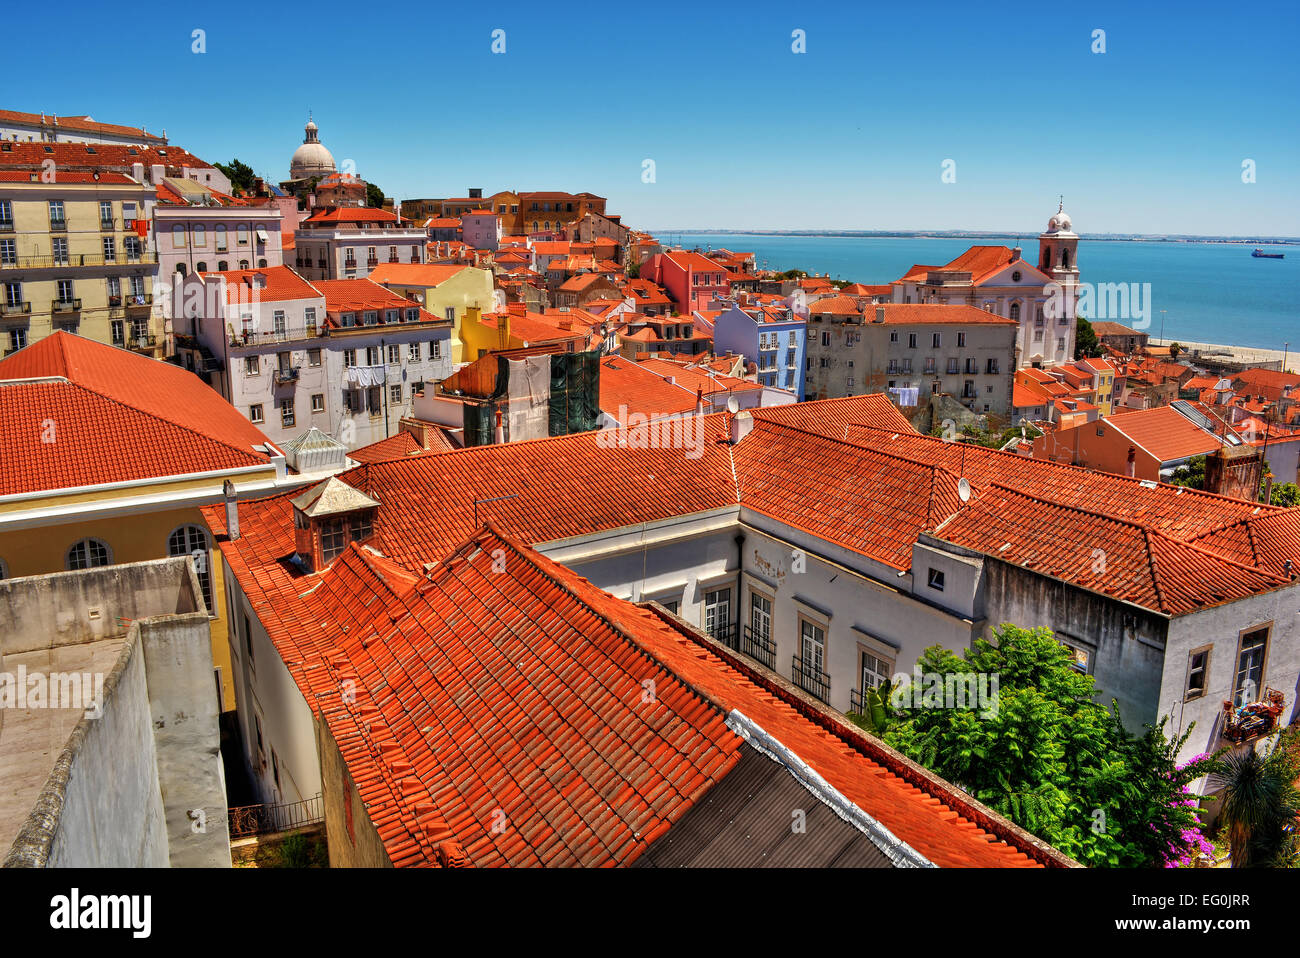 Portugal, Lisbonne, High angle view of old town Banque D'Images